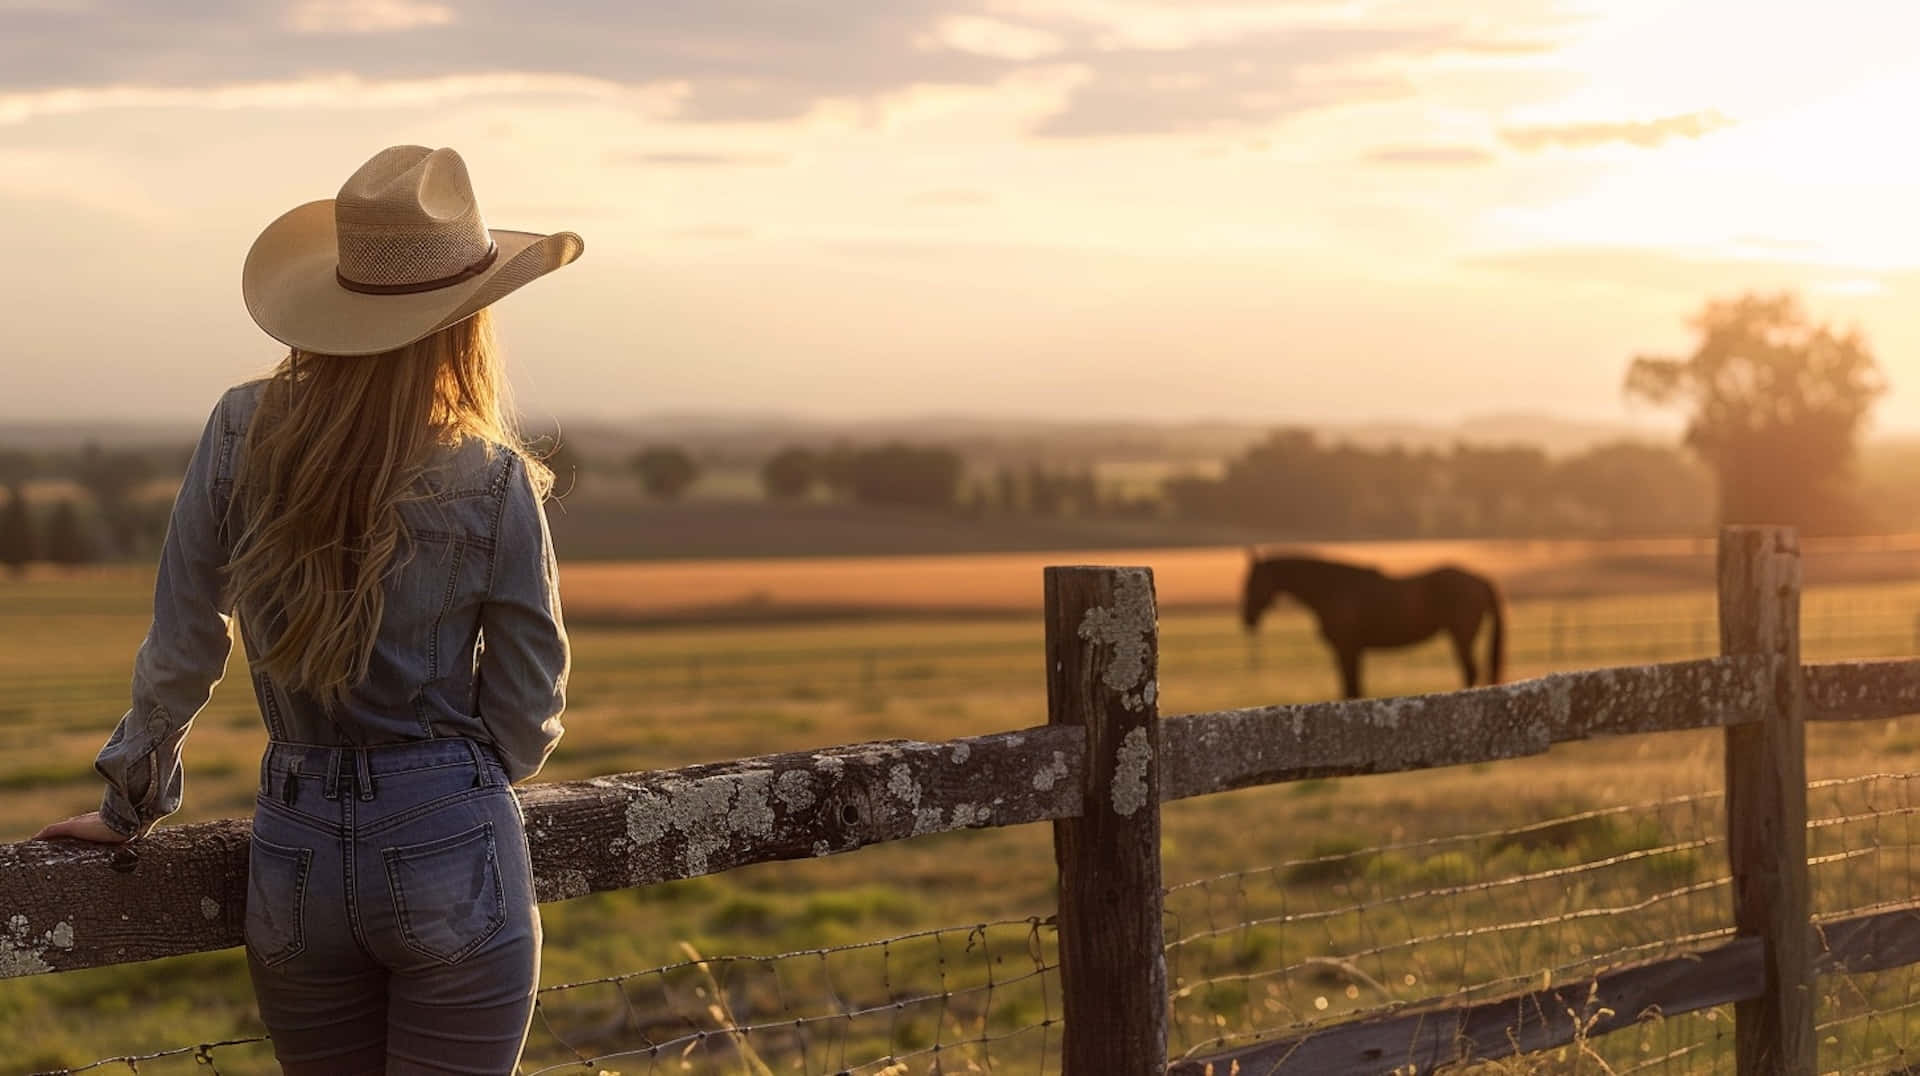 Country Cowgirl Sunset Gazing Wallpaper